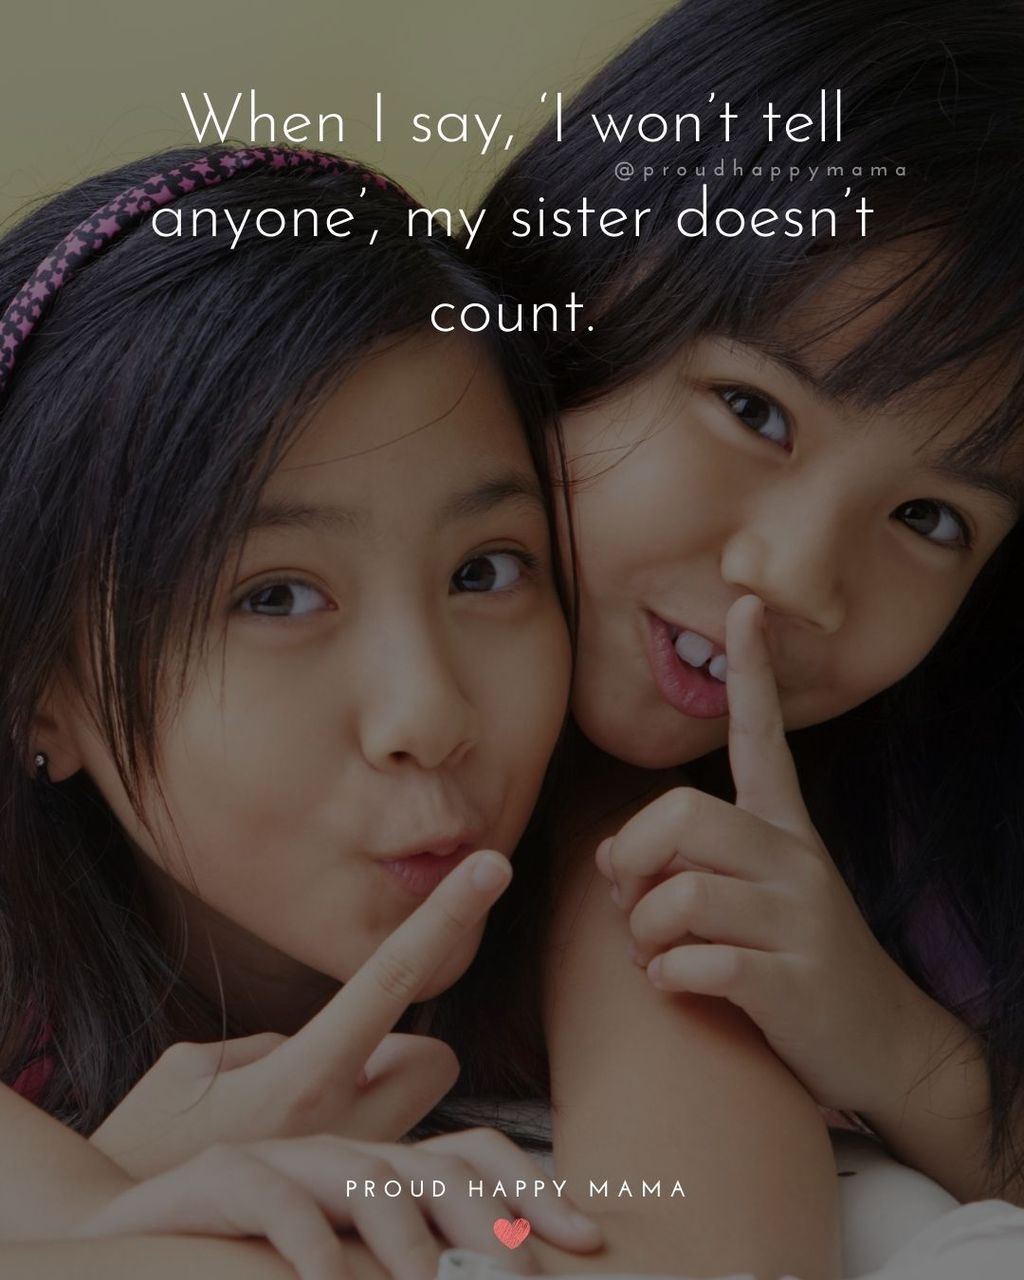 Twin sisters with finger to mouth in quiet gesture with funny sister quote overlay. 'When I say. 'I won't tell anyone', my sister doesn’t count.'